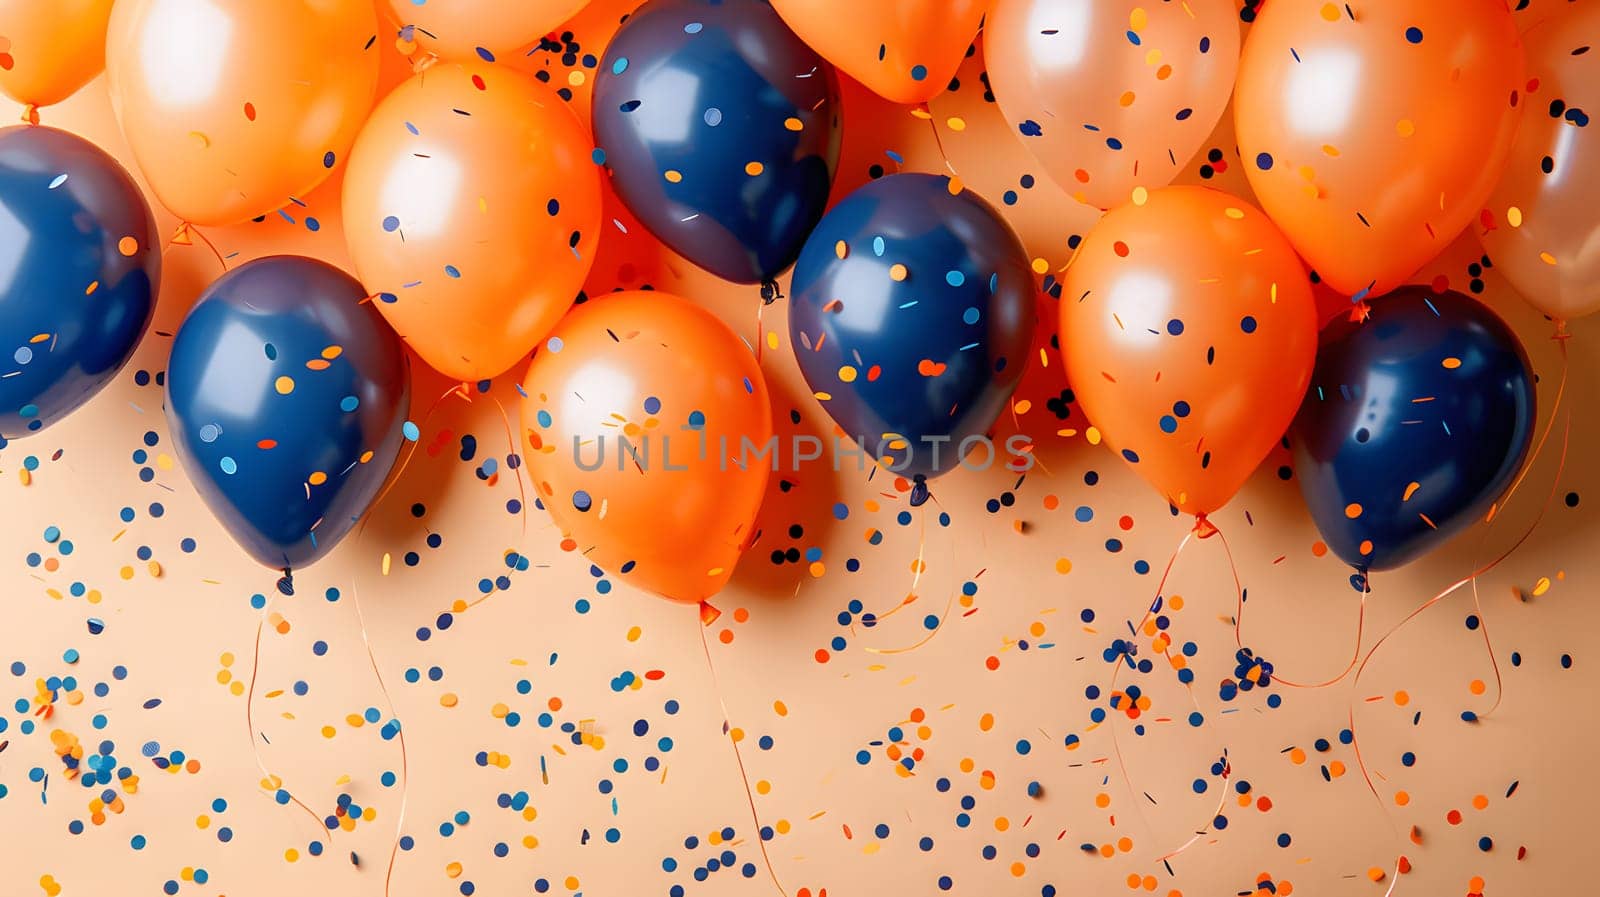 A colorful display of orange and electric blue balloons, along with confetti, arranged on a table. The mix of colors creates a vibrant pattern in a mass production of party decorations